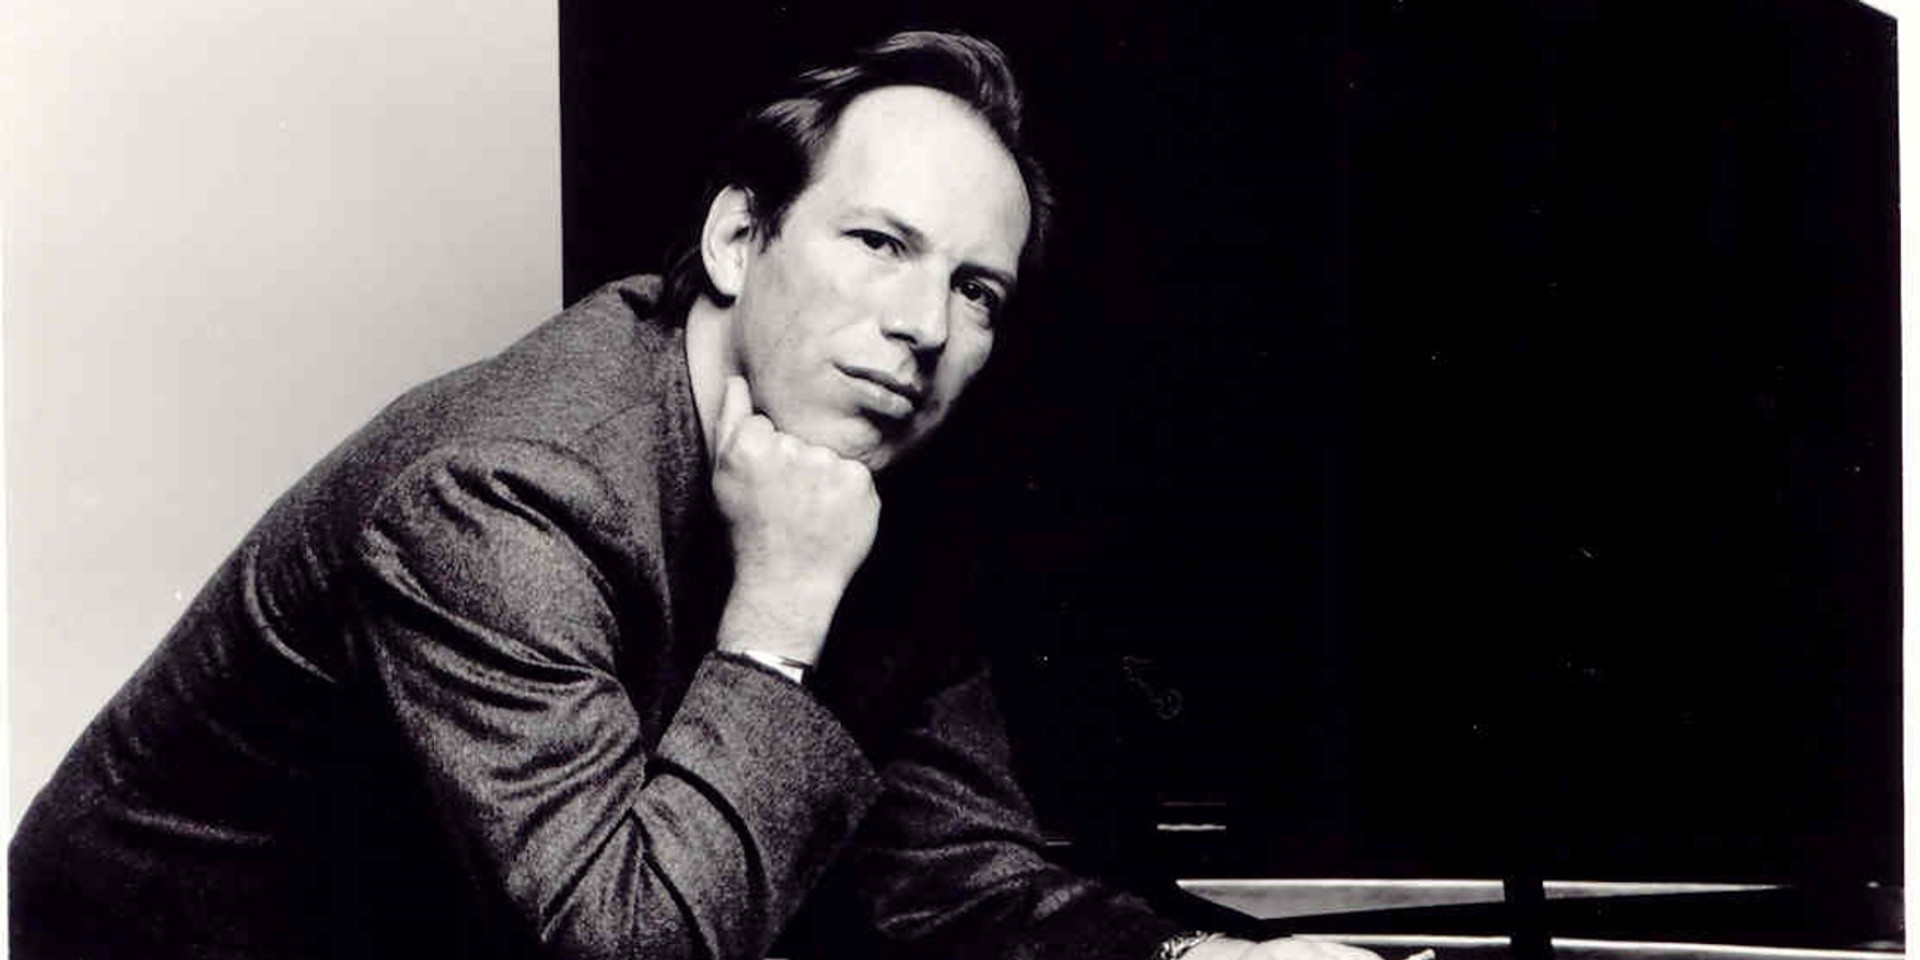 What are your favourite Hans Zimmer soundtracks? Help us build our playlist